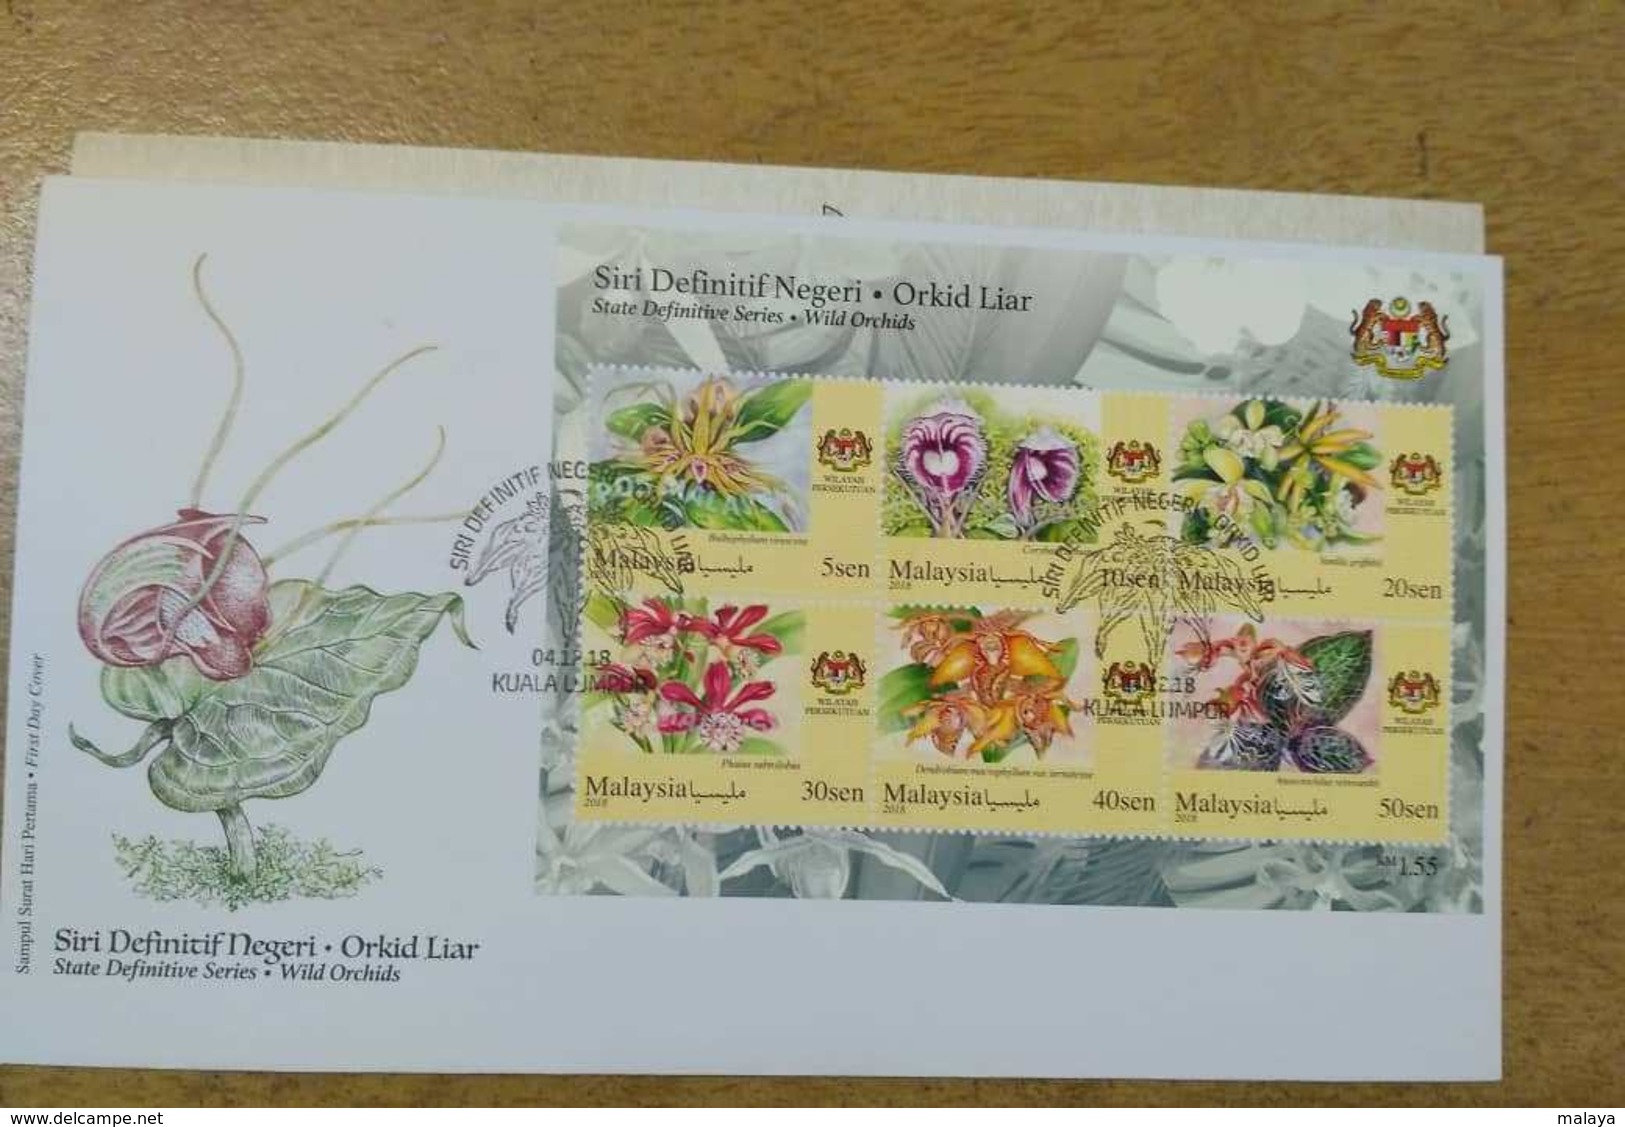 MALAYSIA 2018 FDC Cover Concordant WILD ORCHIDS Definitive States Series 14 MS Complete Sarawak Borneo Sabah Penang - Malaysia (1964-...)